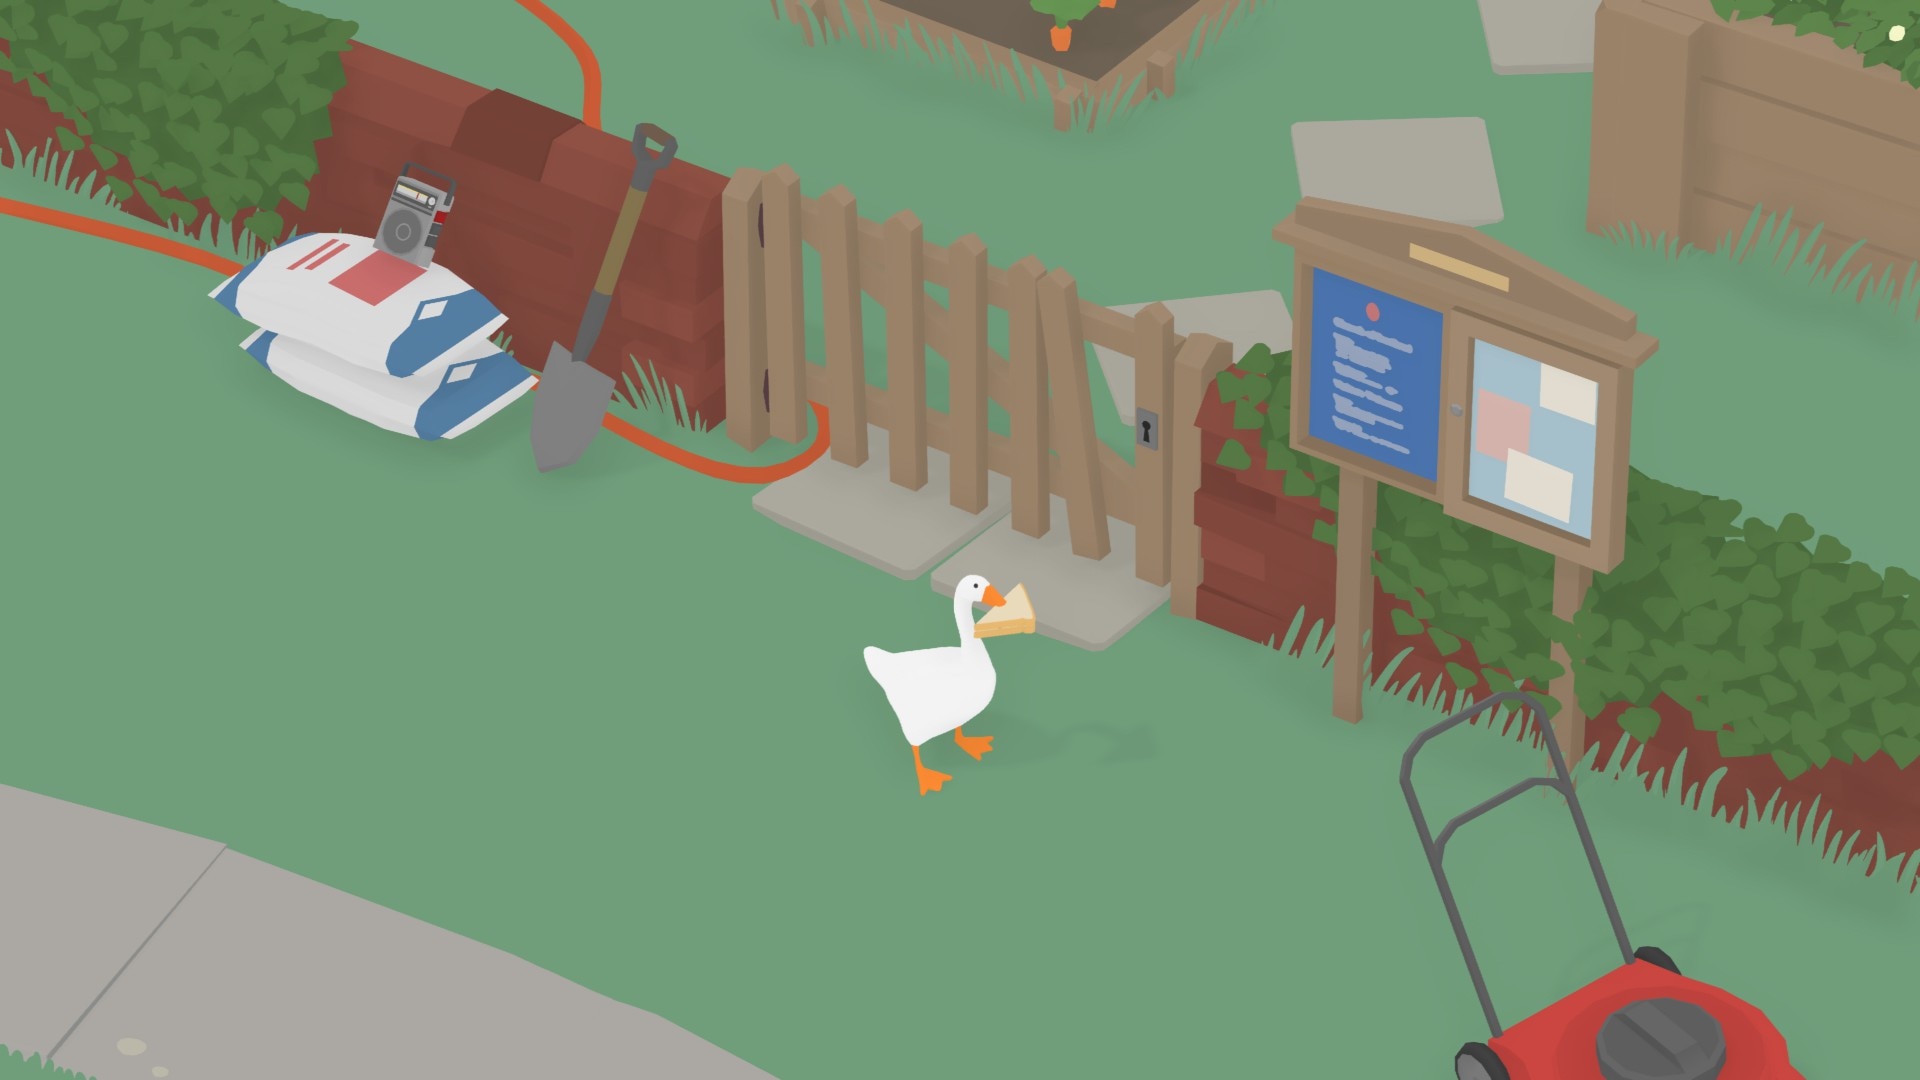 untitled goose game achievements